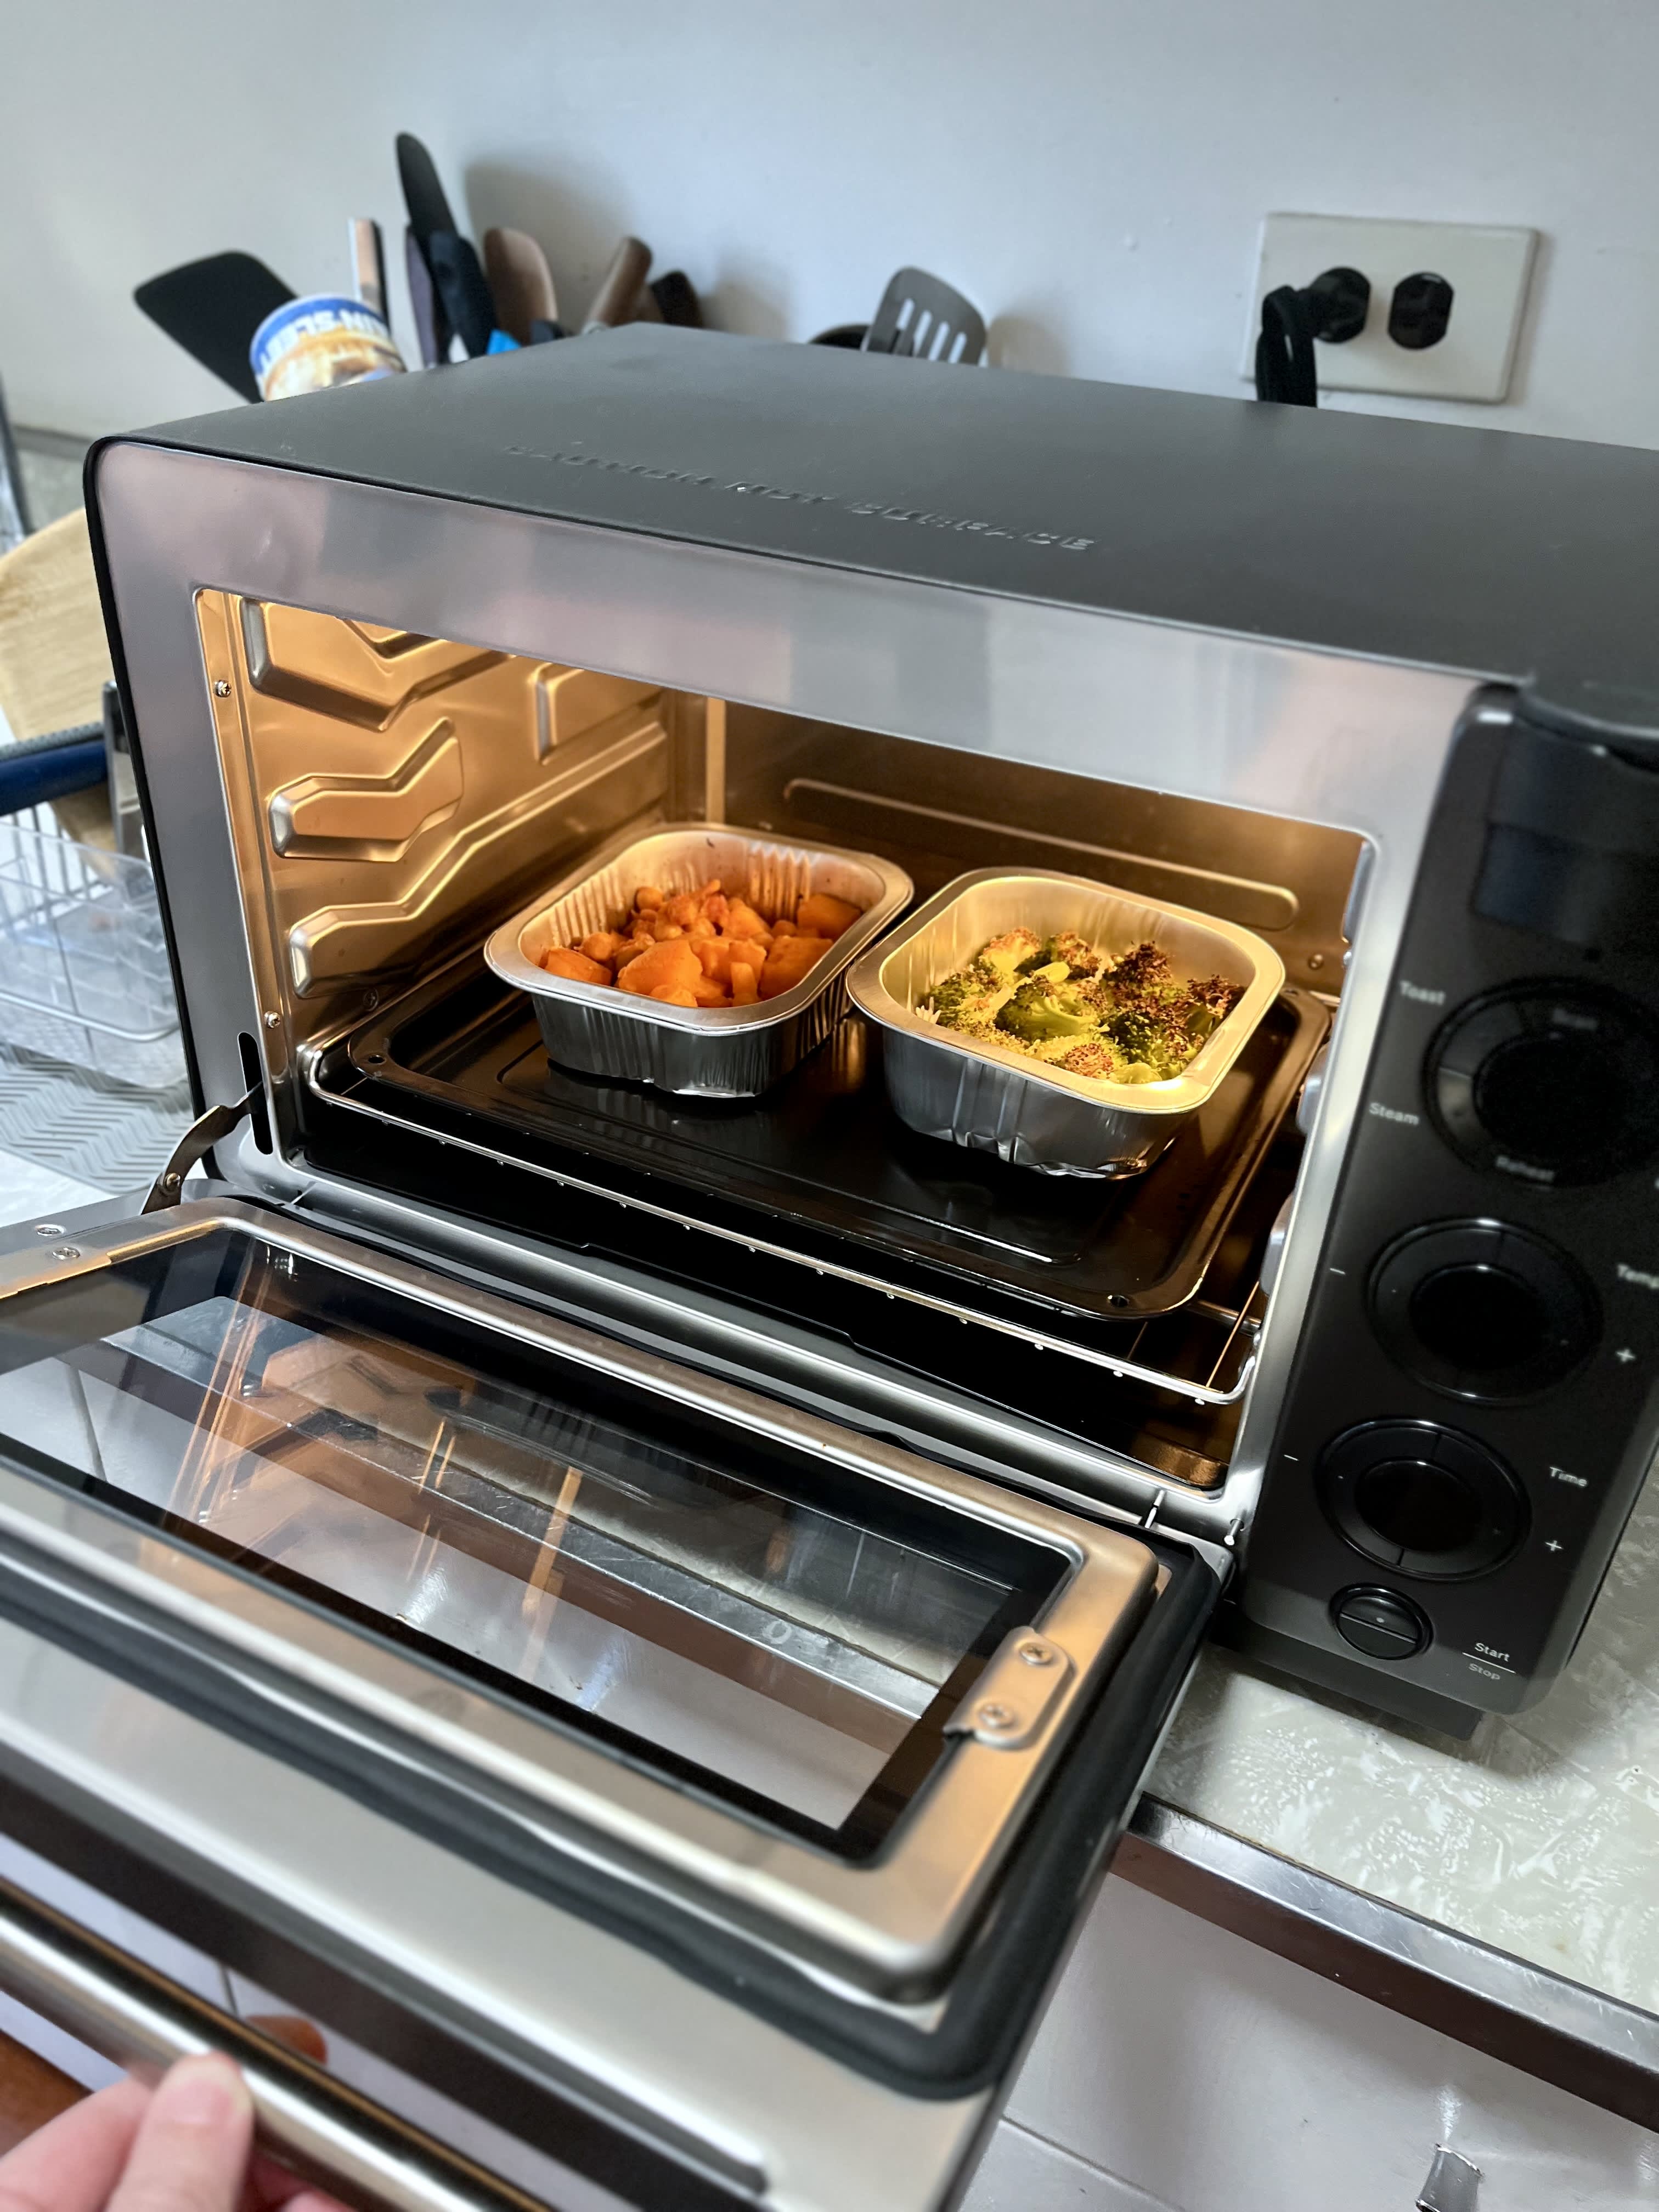 5 Hacks For Getting The Most Out Of Your Tovala Smart Oven & Smart Oven Pro